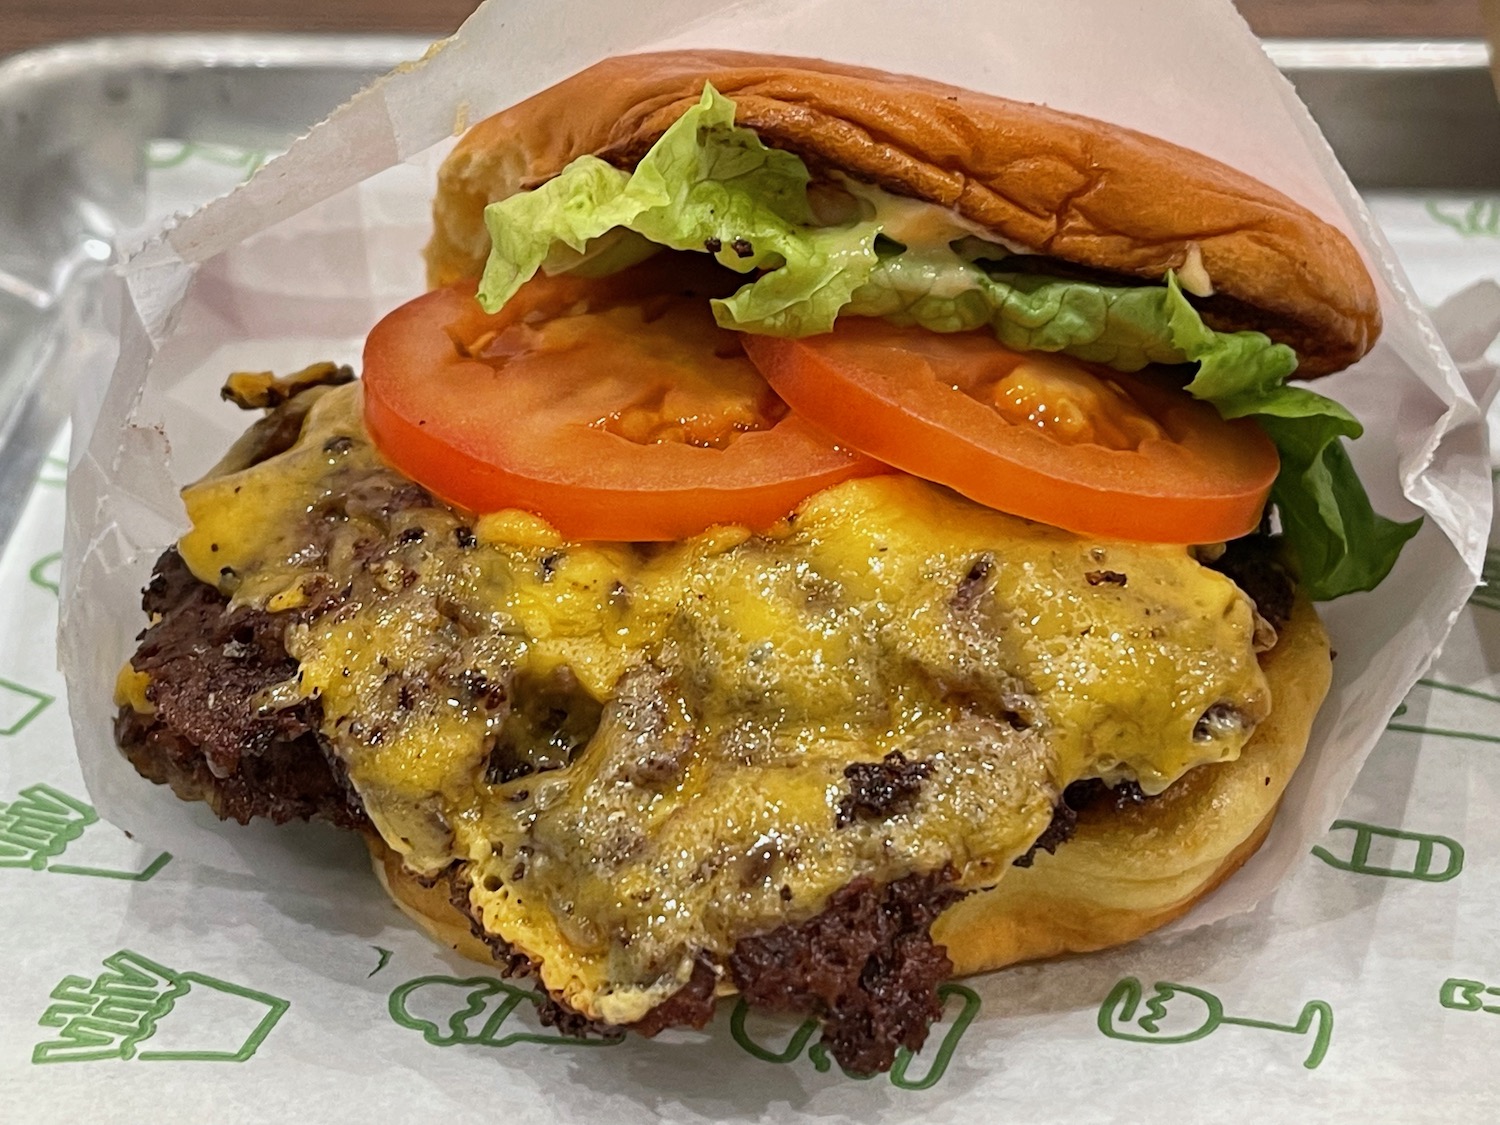 a cheeseburger with tomatoes and lettuce